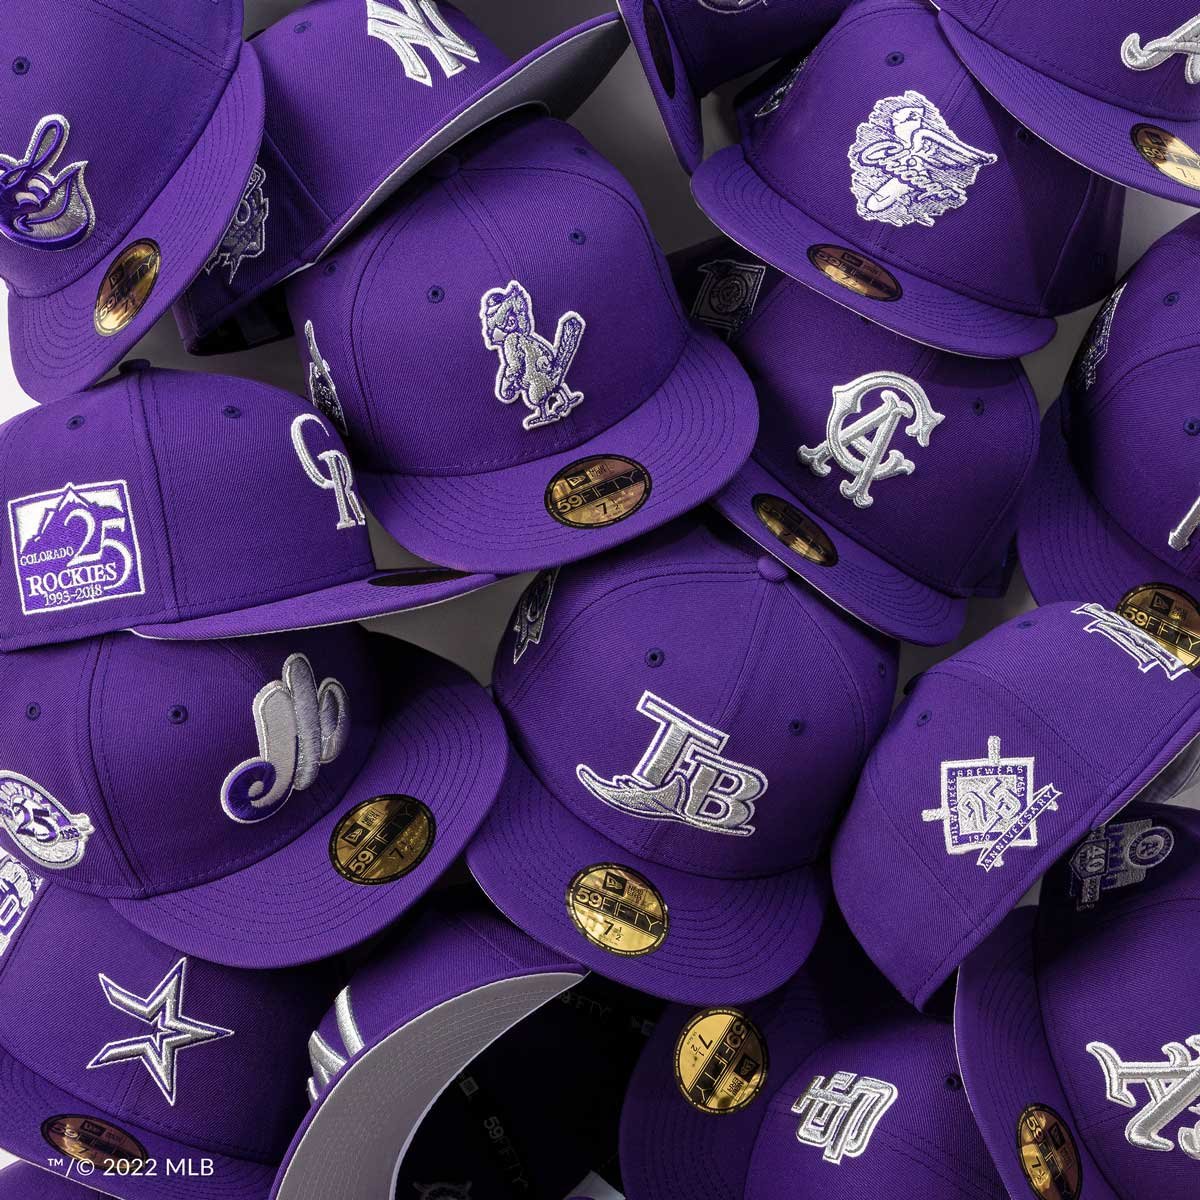 Now Available: New Era 59FIFTY MLB Fitted Hat Purple Refresh